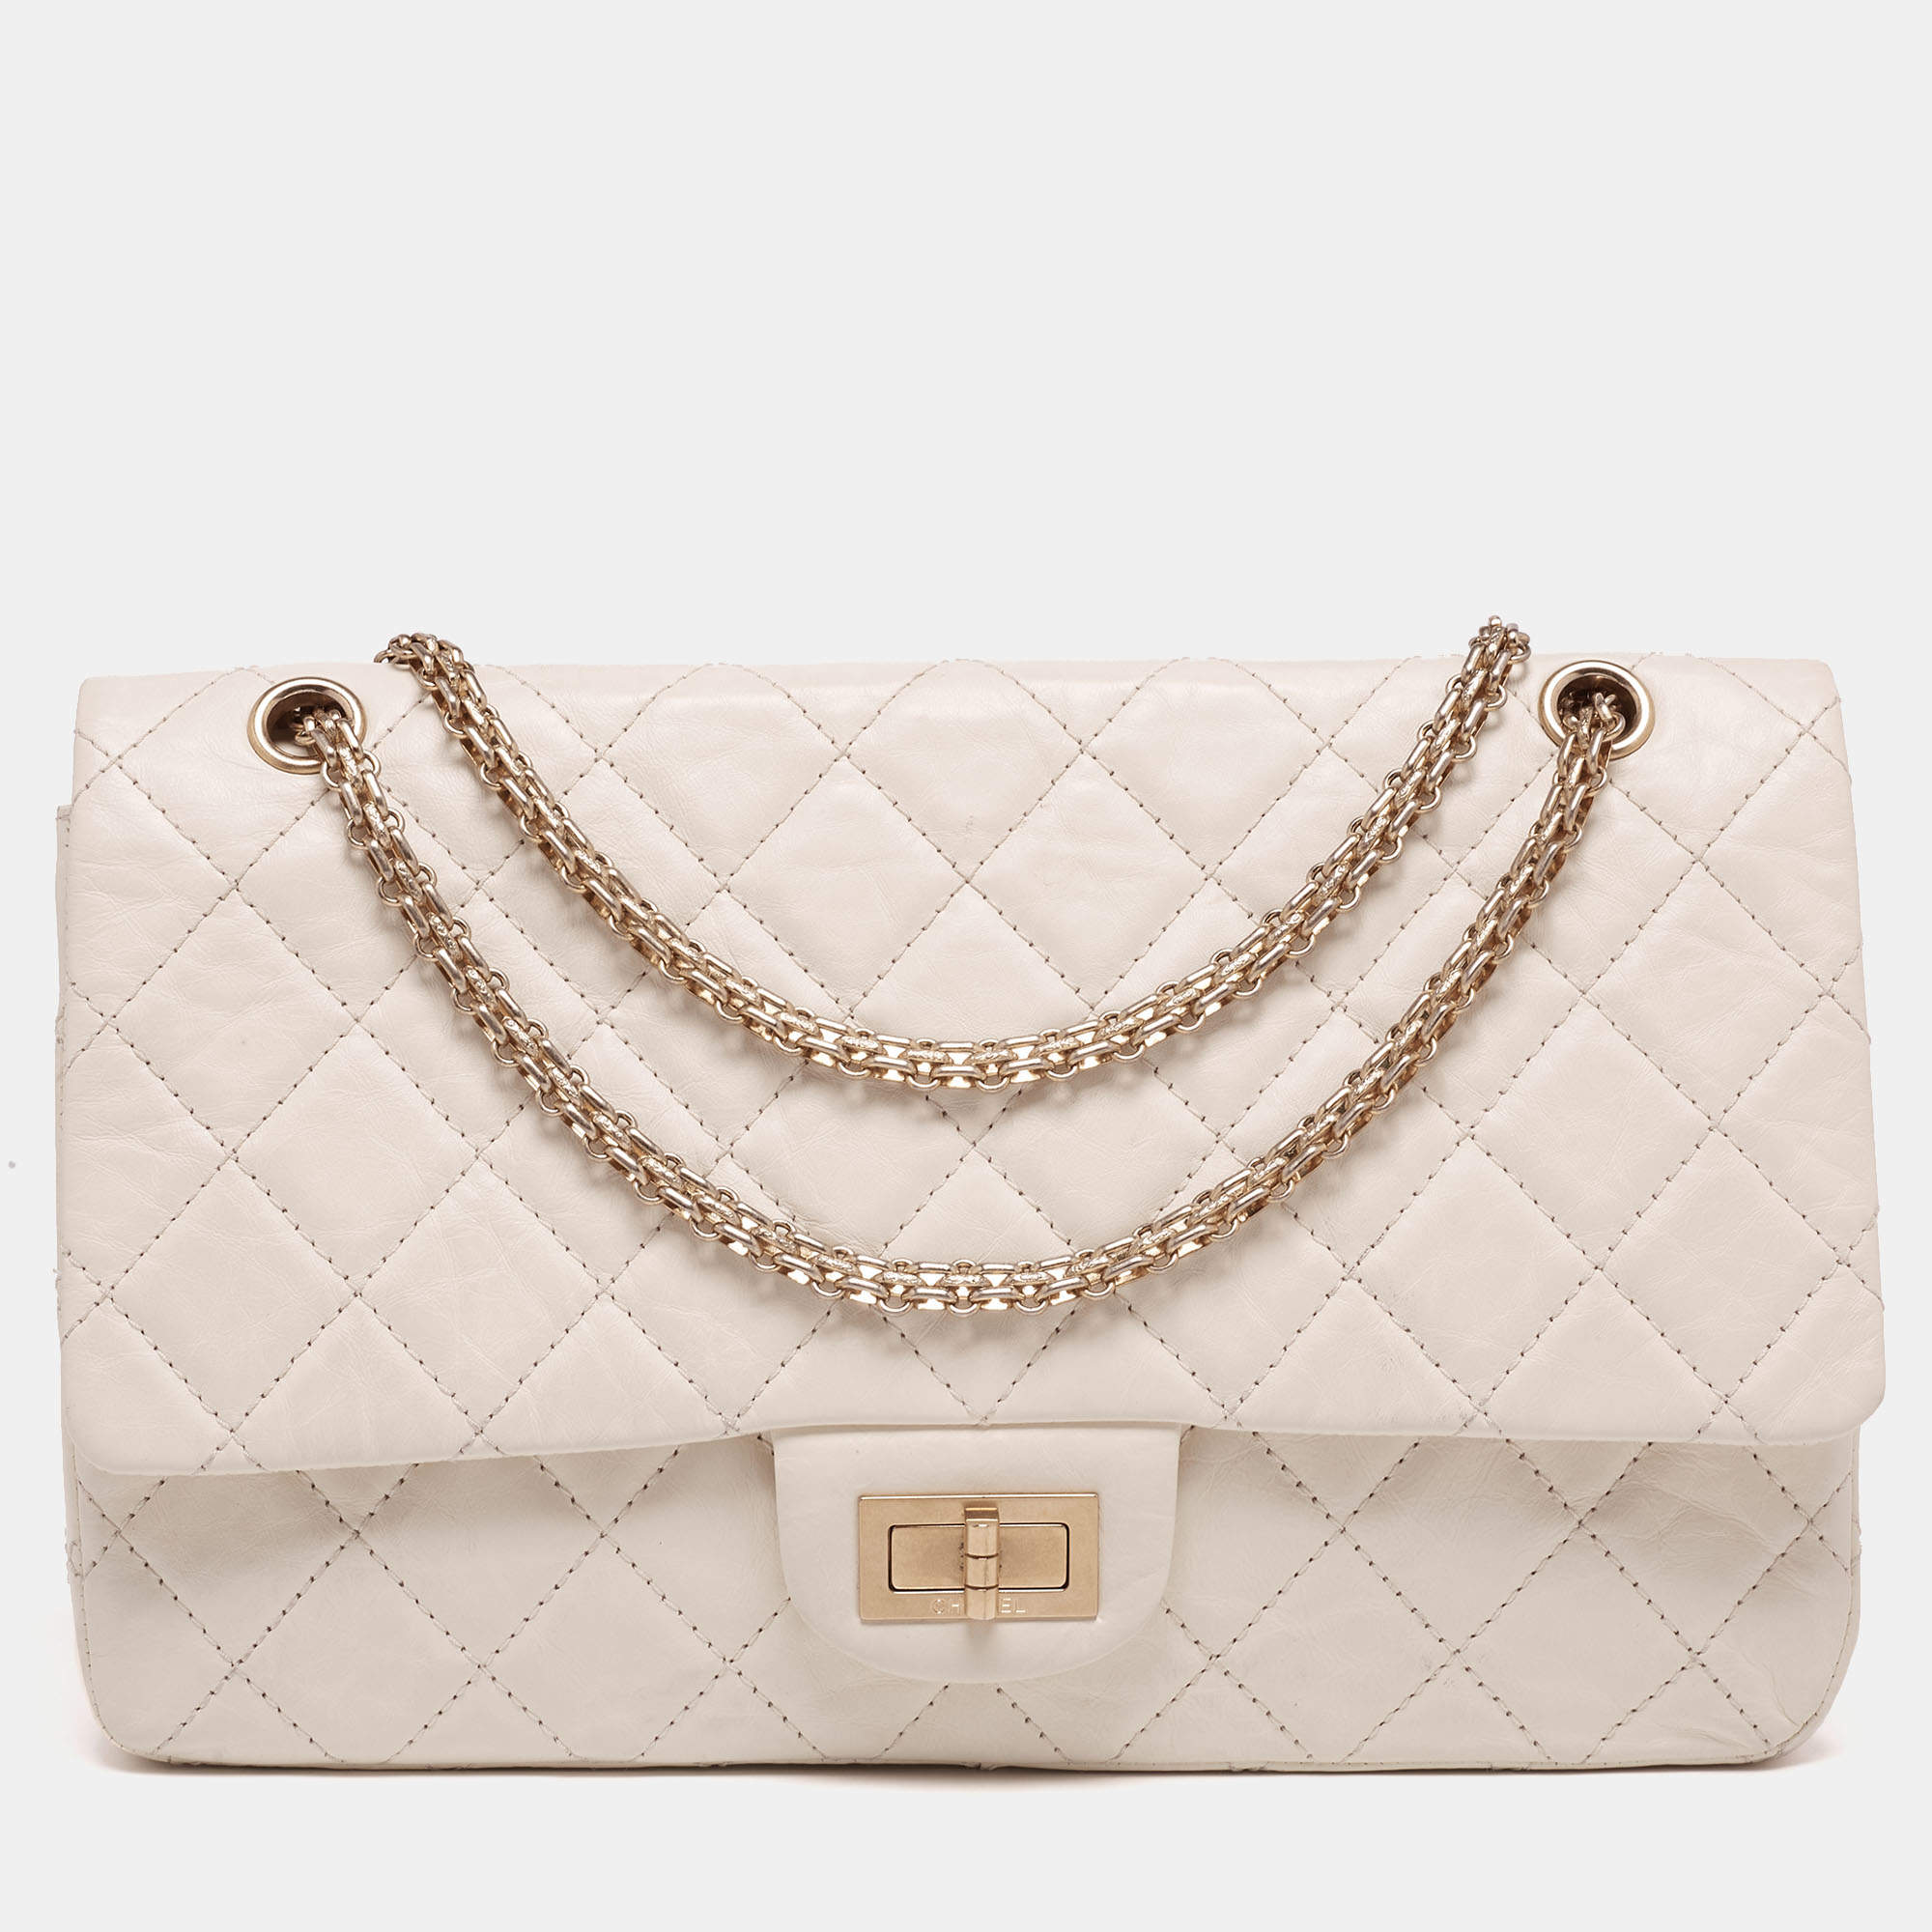 Chanel Off White Quilted Aged Leather Reissue 2.55 Classic 227